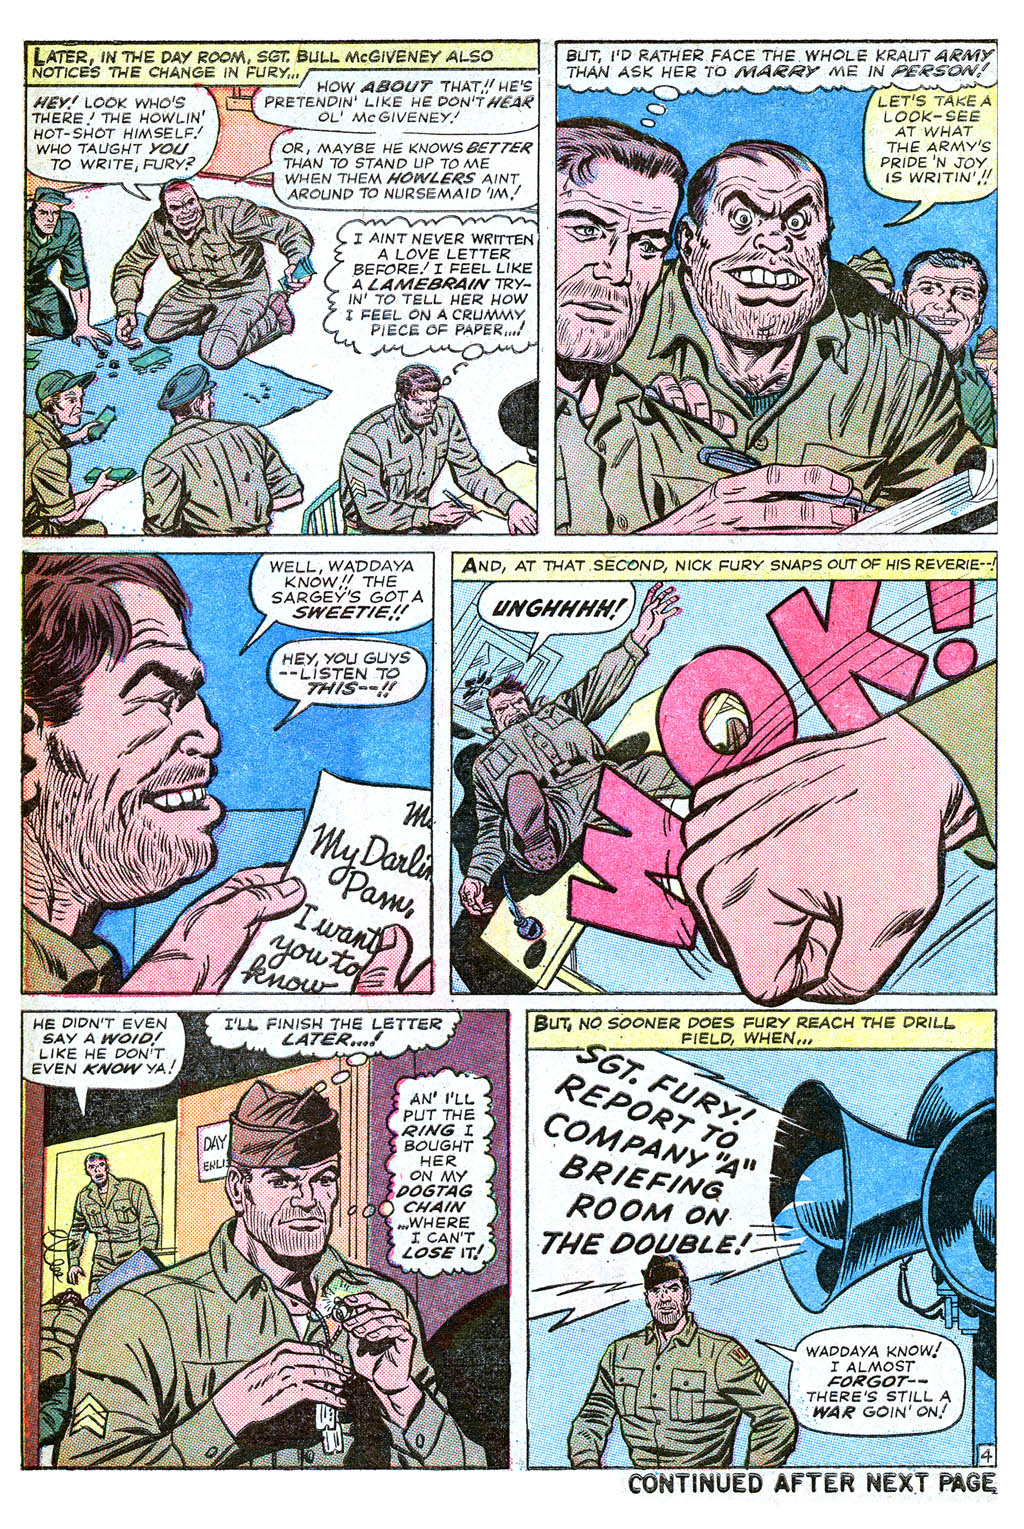 Read online Sgt. Fury comic -  Issue #18 - 6